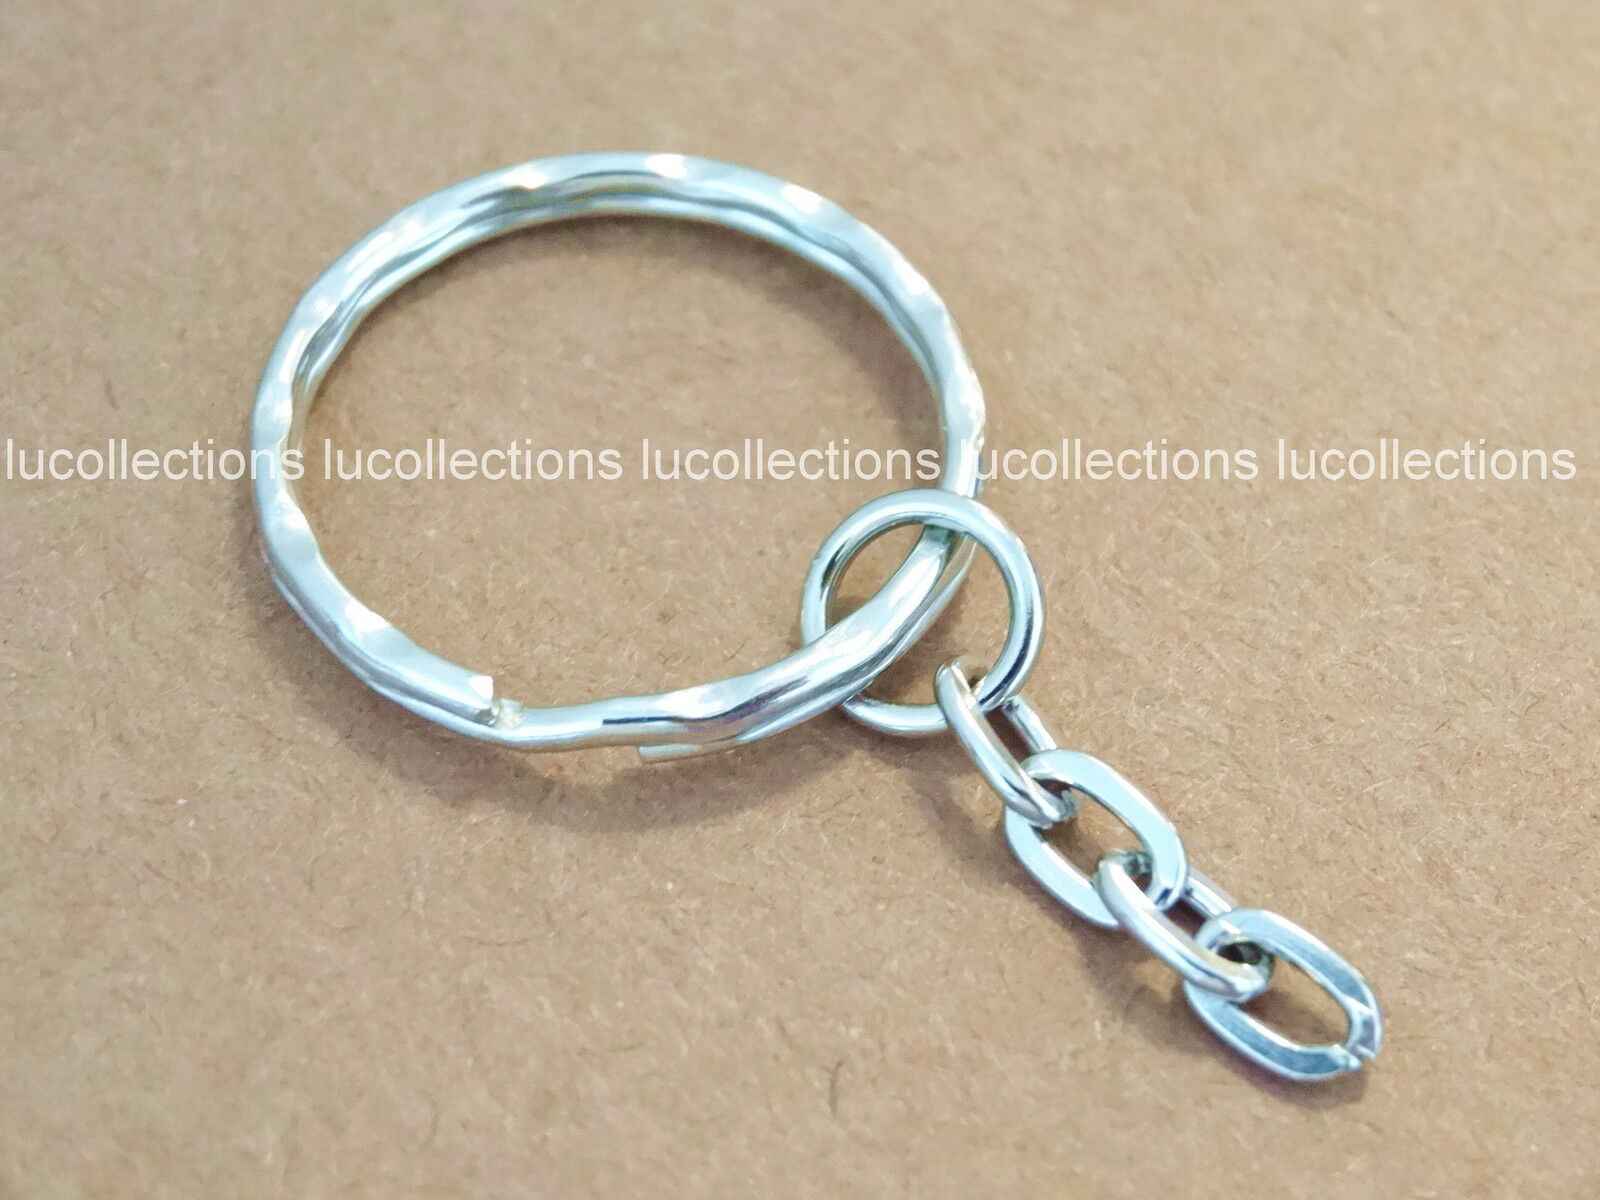 100 Key Ring With Chain Key Rings 1" Key Chains Hammered H132-100